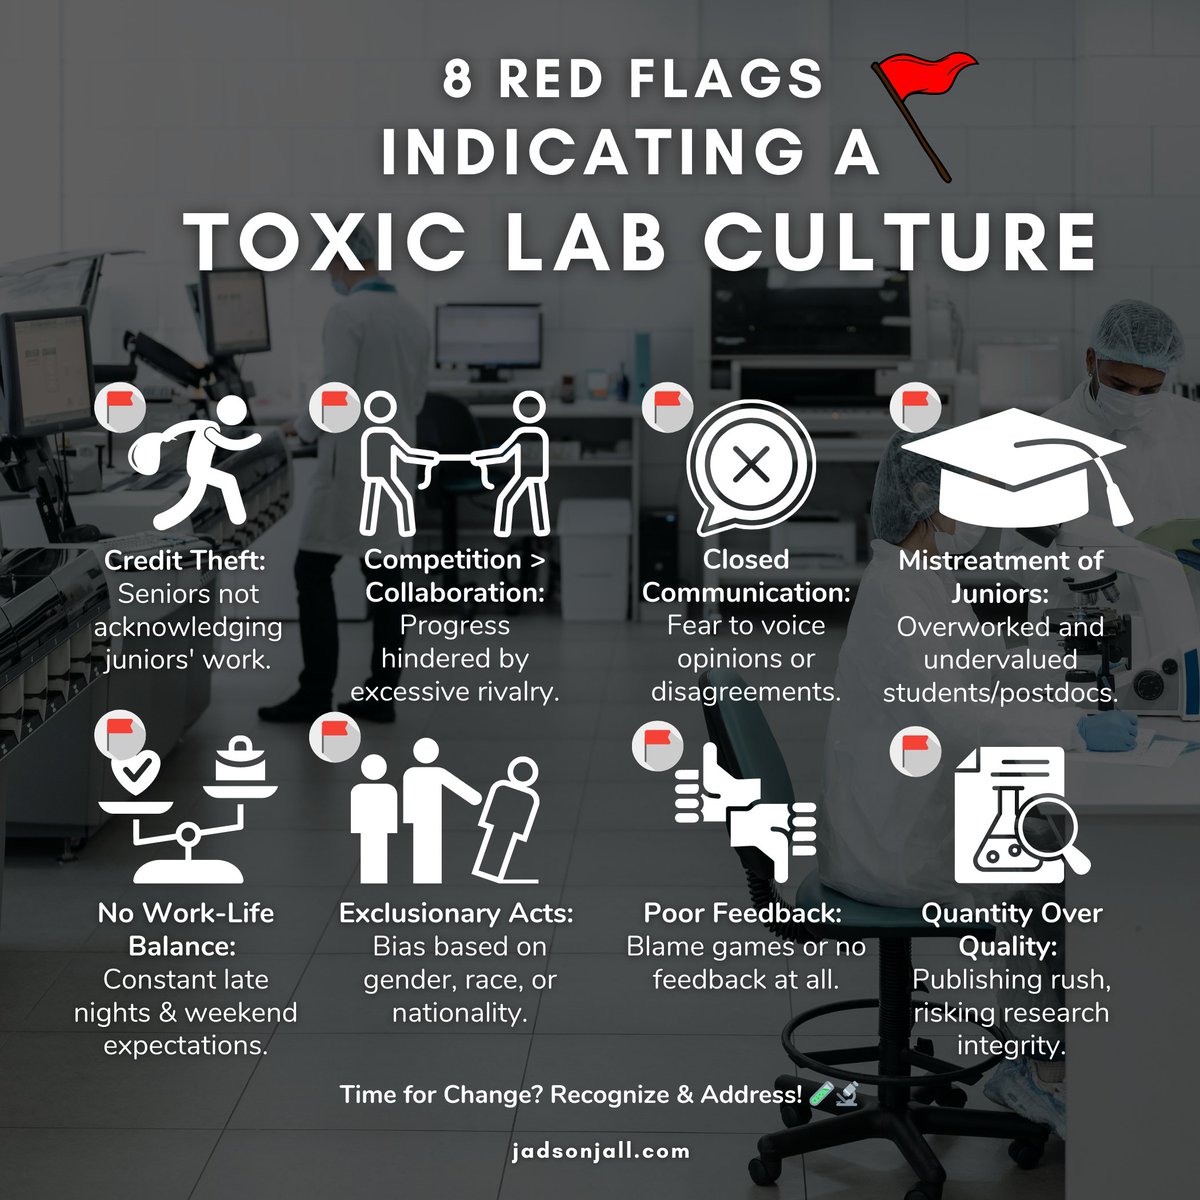 Colleagues and fellow researchers, Our community must be aware of these red flags, as they hinder our research's progress and quality and impact the mental and emotional well-being of our brightest minds. See the full post in my newsletter: jadsonjall.com/2023/08/13/8-r… #LabCulture…